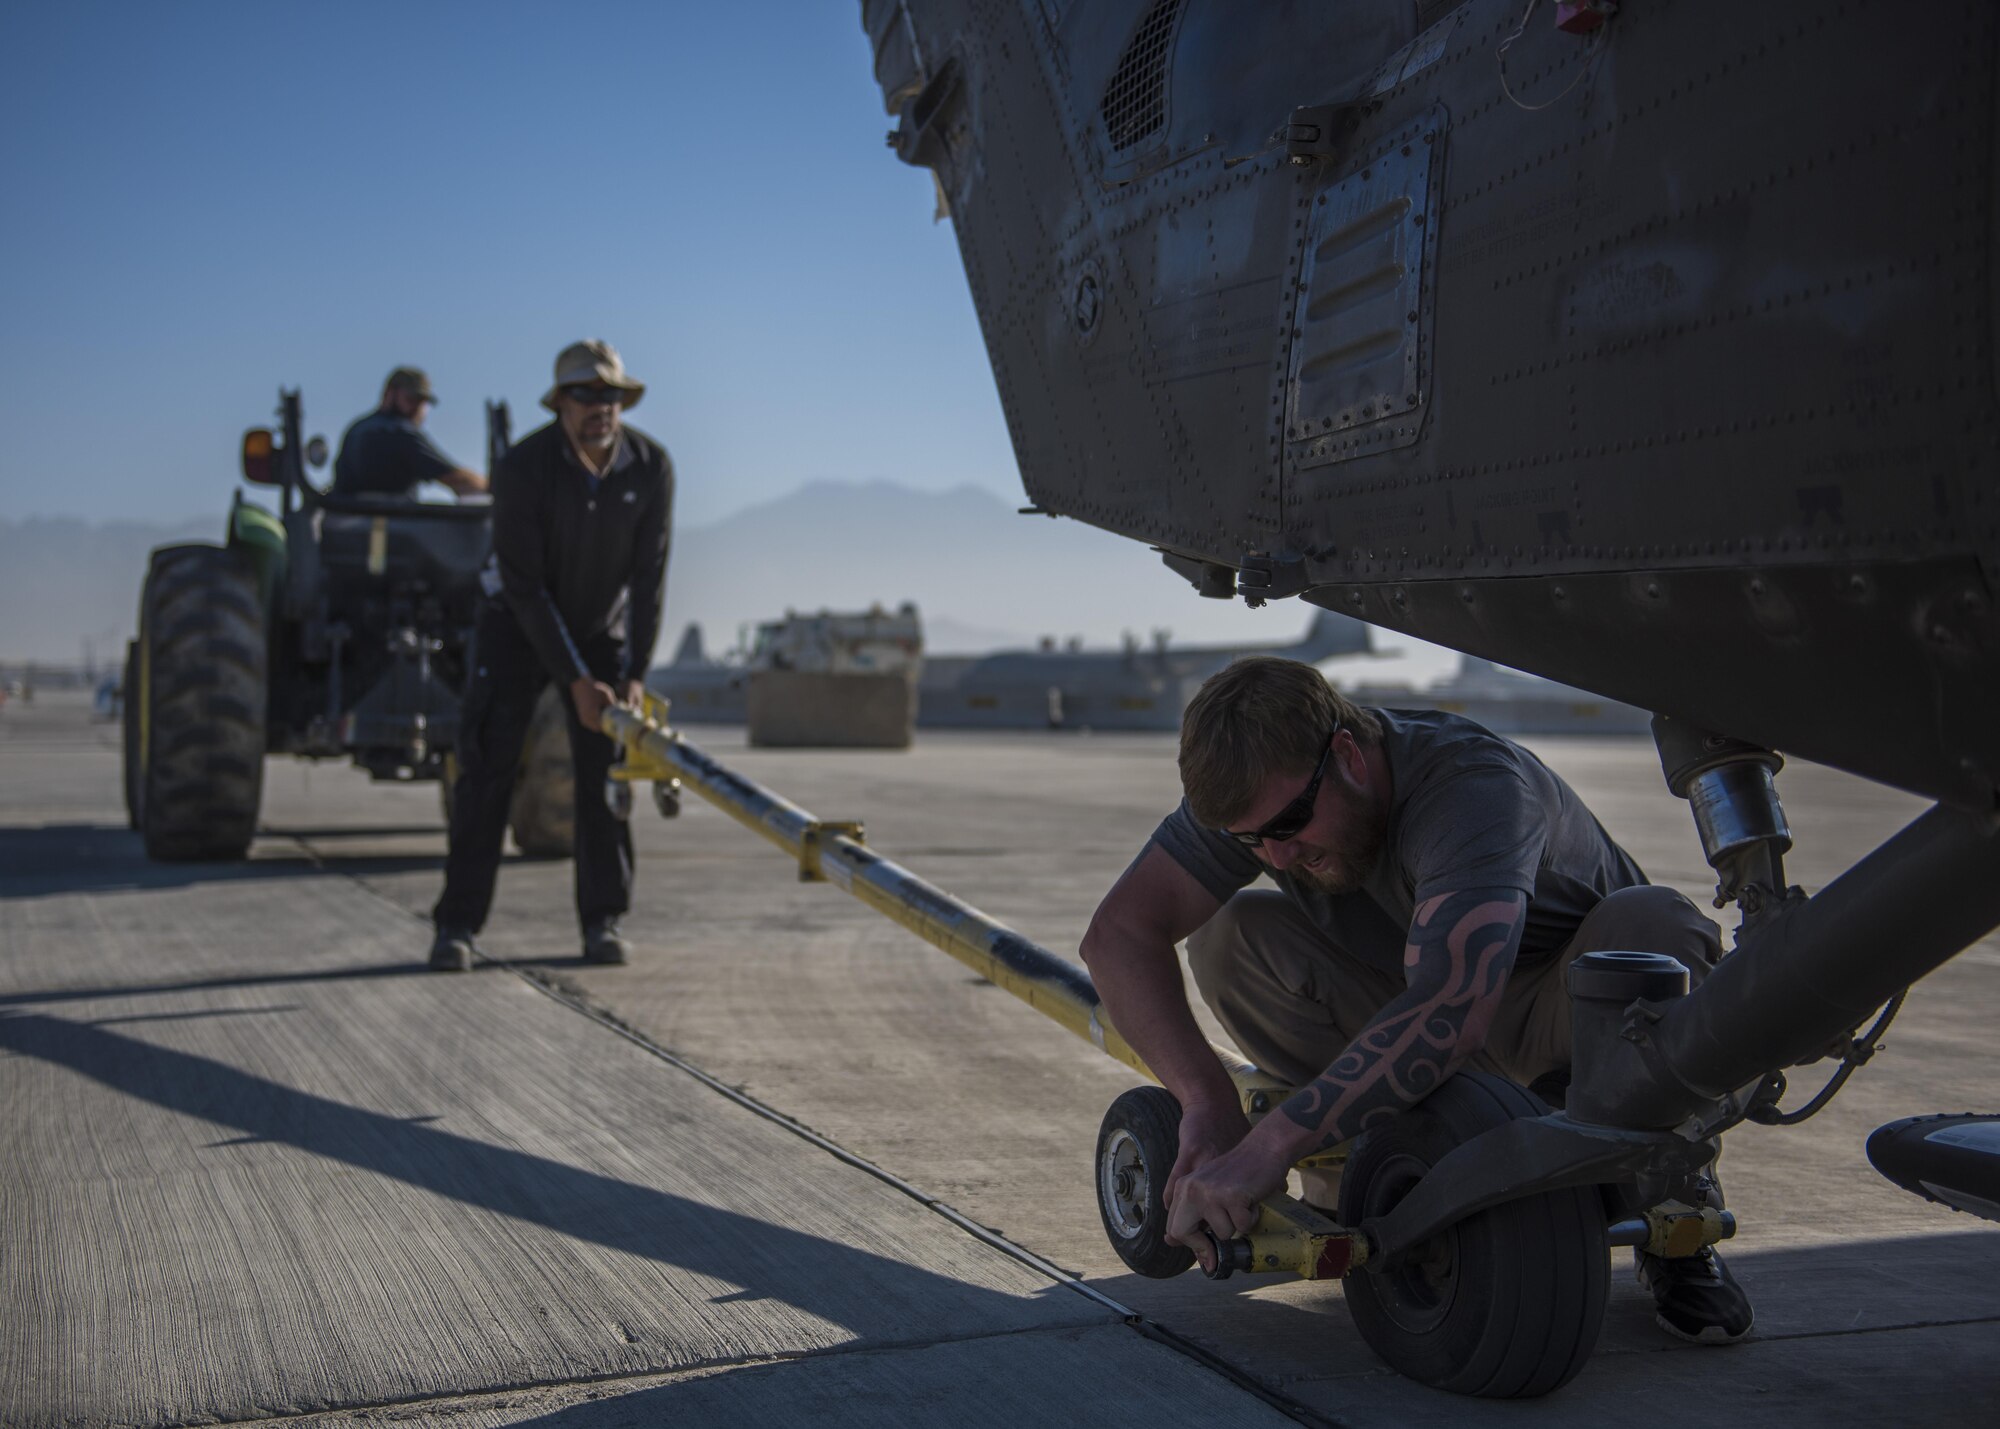 Michael Ballew, Department of Defense contractor, connects a tow bar to a Sikorsky UH-60 Blackhawk, Bagram Airfield, Afghanistan, Sept. 8, 2016. When Army aircrew units redeploy back to their home stations, the Blackhawks are packed up and transported back on aircraft such as the C-5 Galaxy. As the Air Force’s largest strategic airlifter, the C-5 can handle a payload of up to 5 helicopters. (U.S. Air Force photo by Senior Airman Justyn M. Freeman)